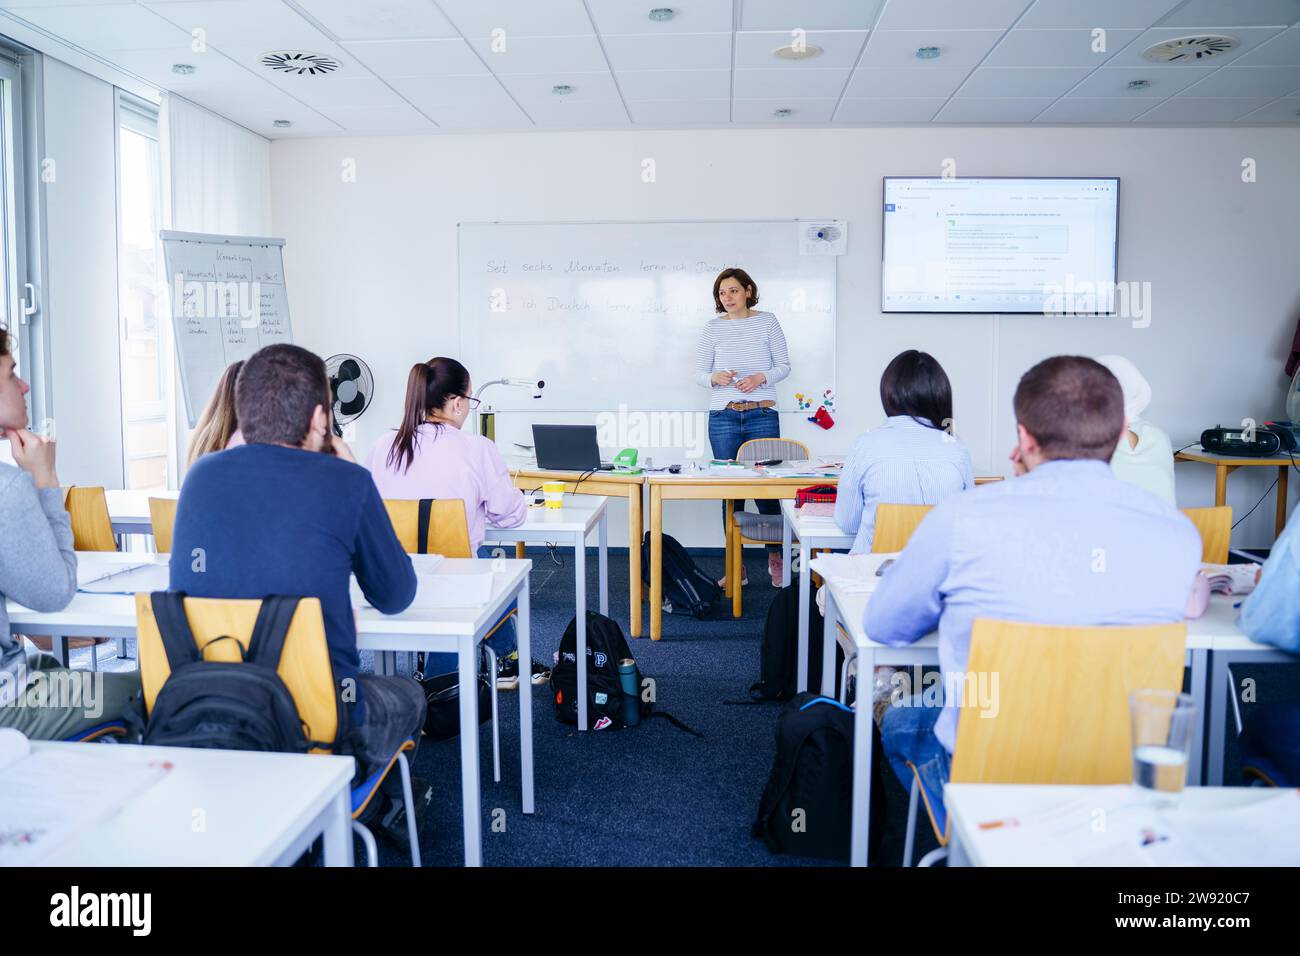 Woman teaching to multi-ethnic students in classroom Stock Photo